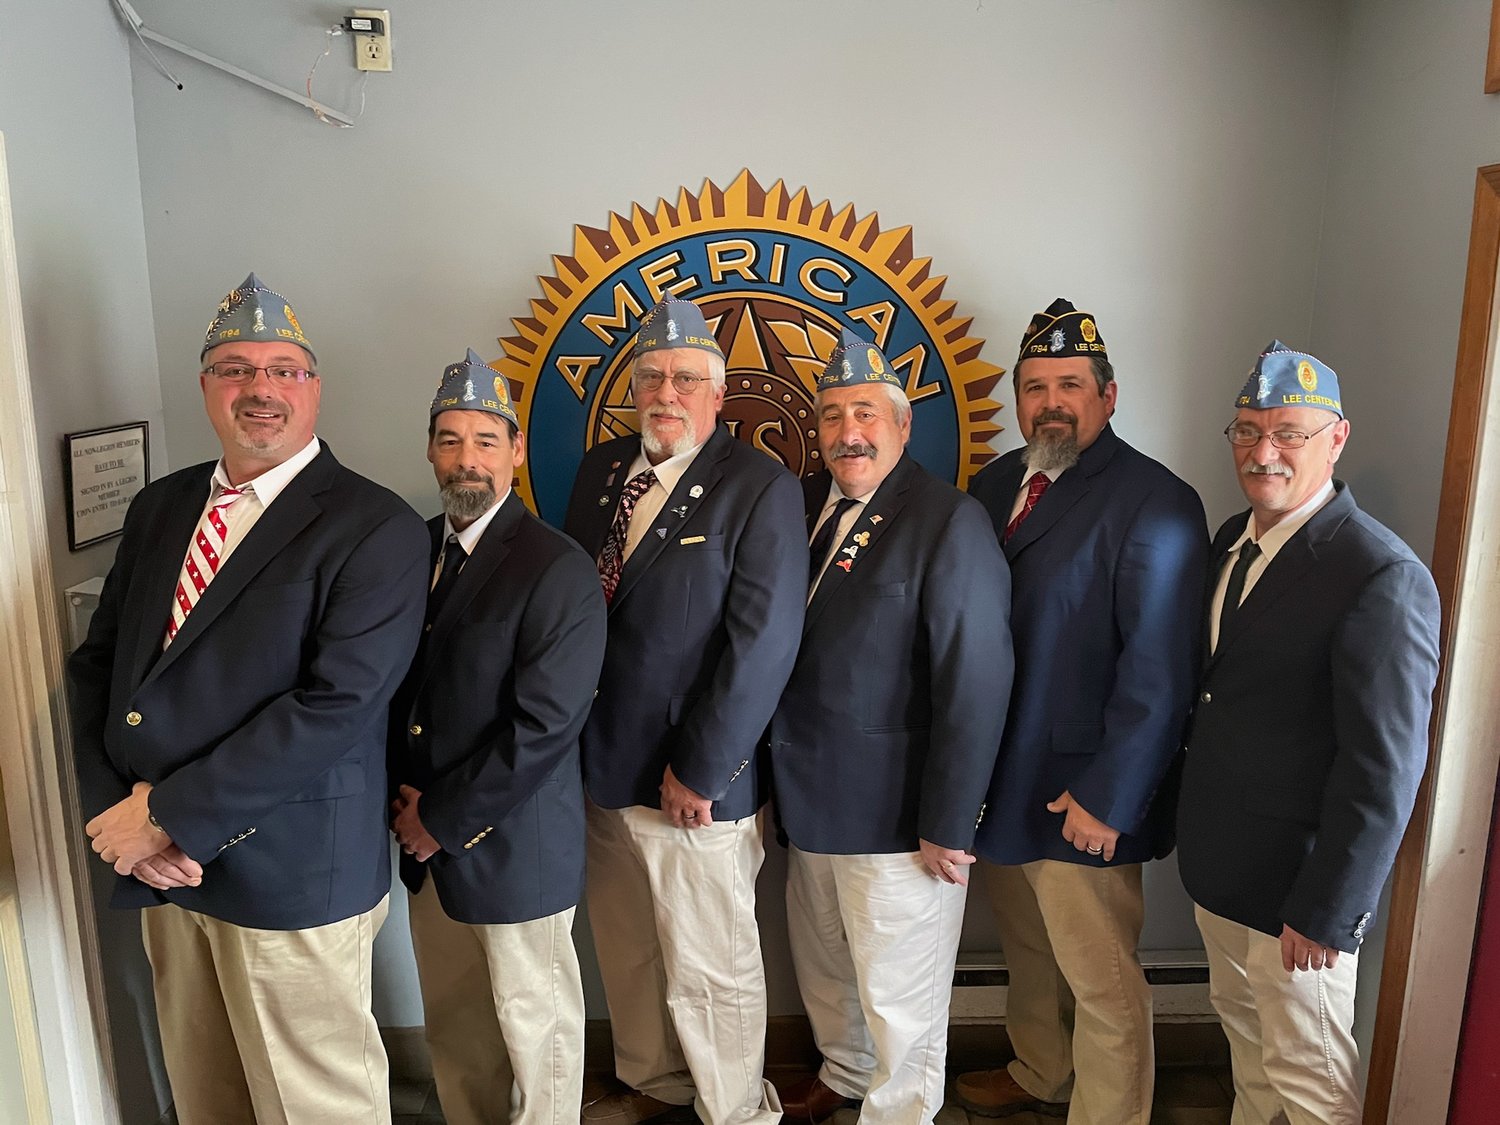 The Sons of the American Legion at Lee American Legion Post 1794 has installed its officers for the coming year. From left: Bob Washburn, commander; Darrin Martin, second vice commander; Shane Haley, finance Officer; Ron Crill, sergeant-at-arms; Norris Whitmore, adjutant; and Dale Schultz, historian. The Lee Legion Post is located at 9025 Veterans Memorial Parkway on Lee Center.